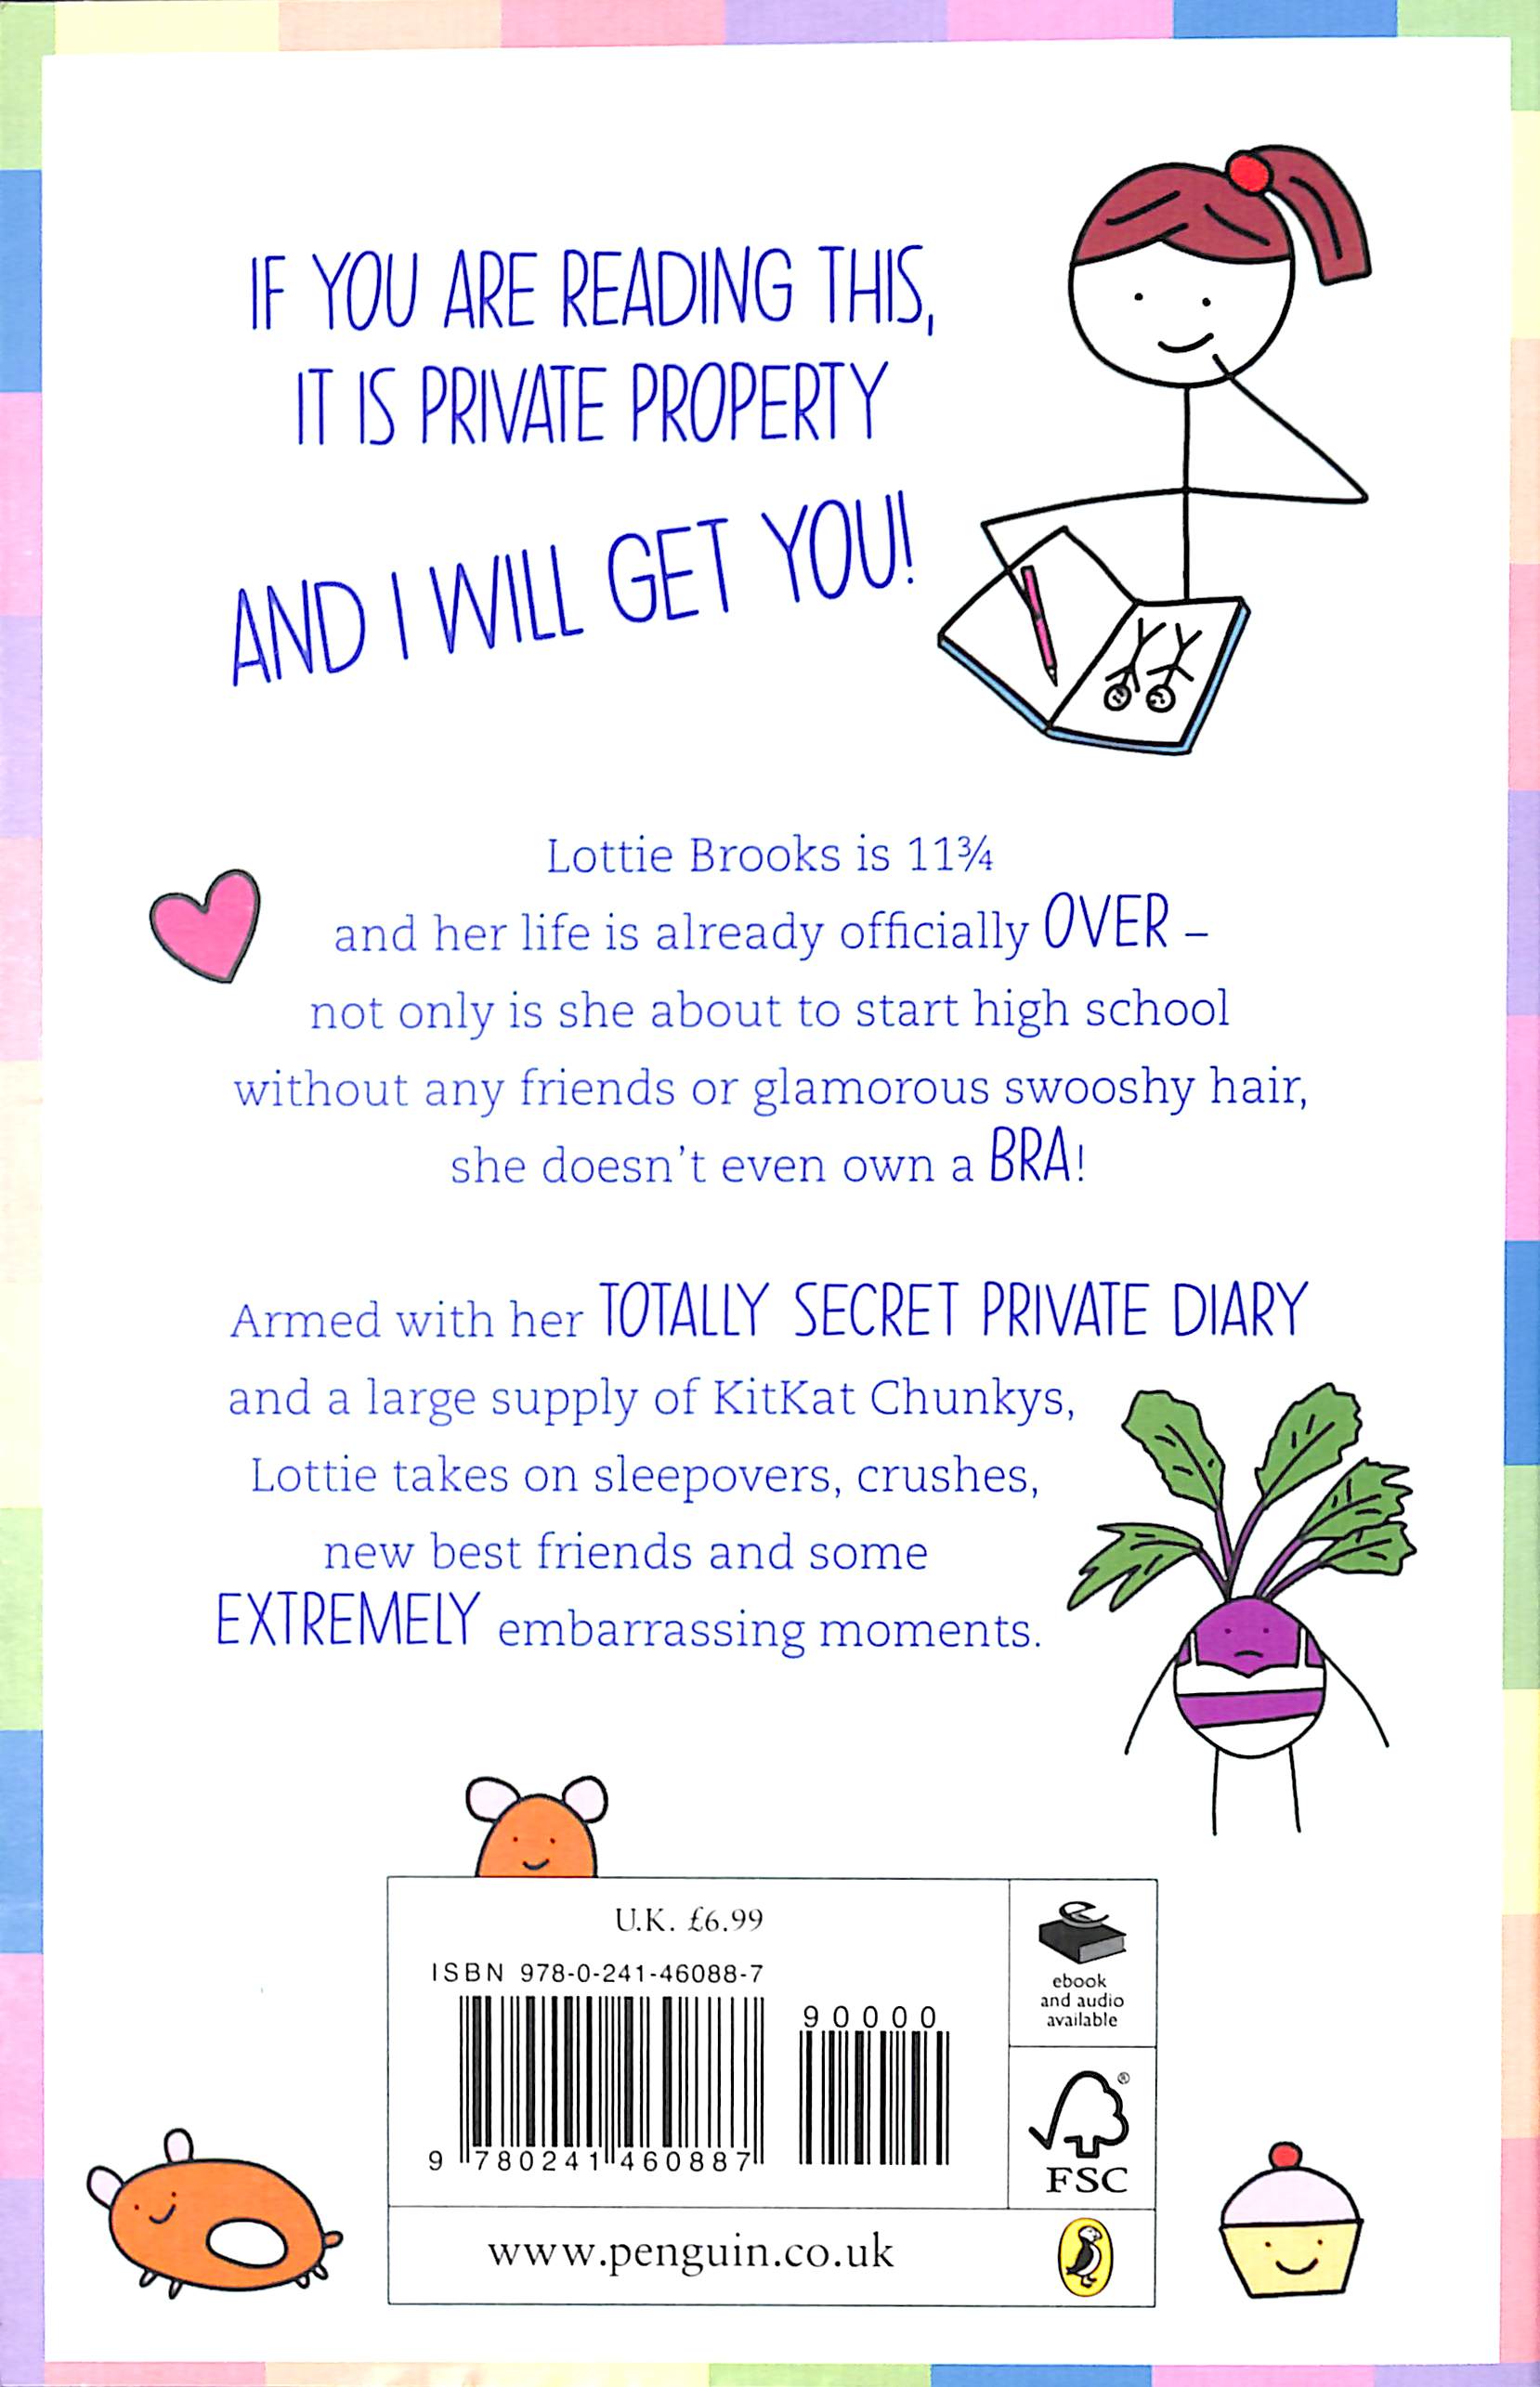 The extremely embarrassing life of Lottie Brooks by Katie Kirby